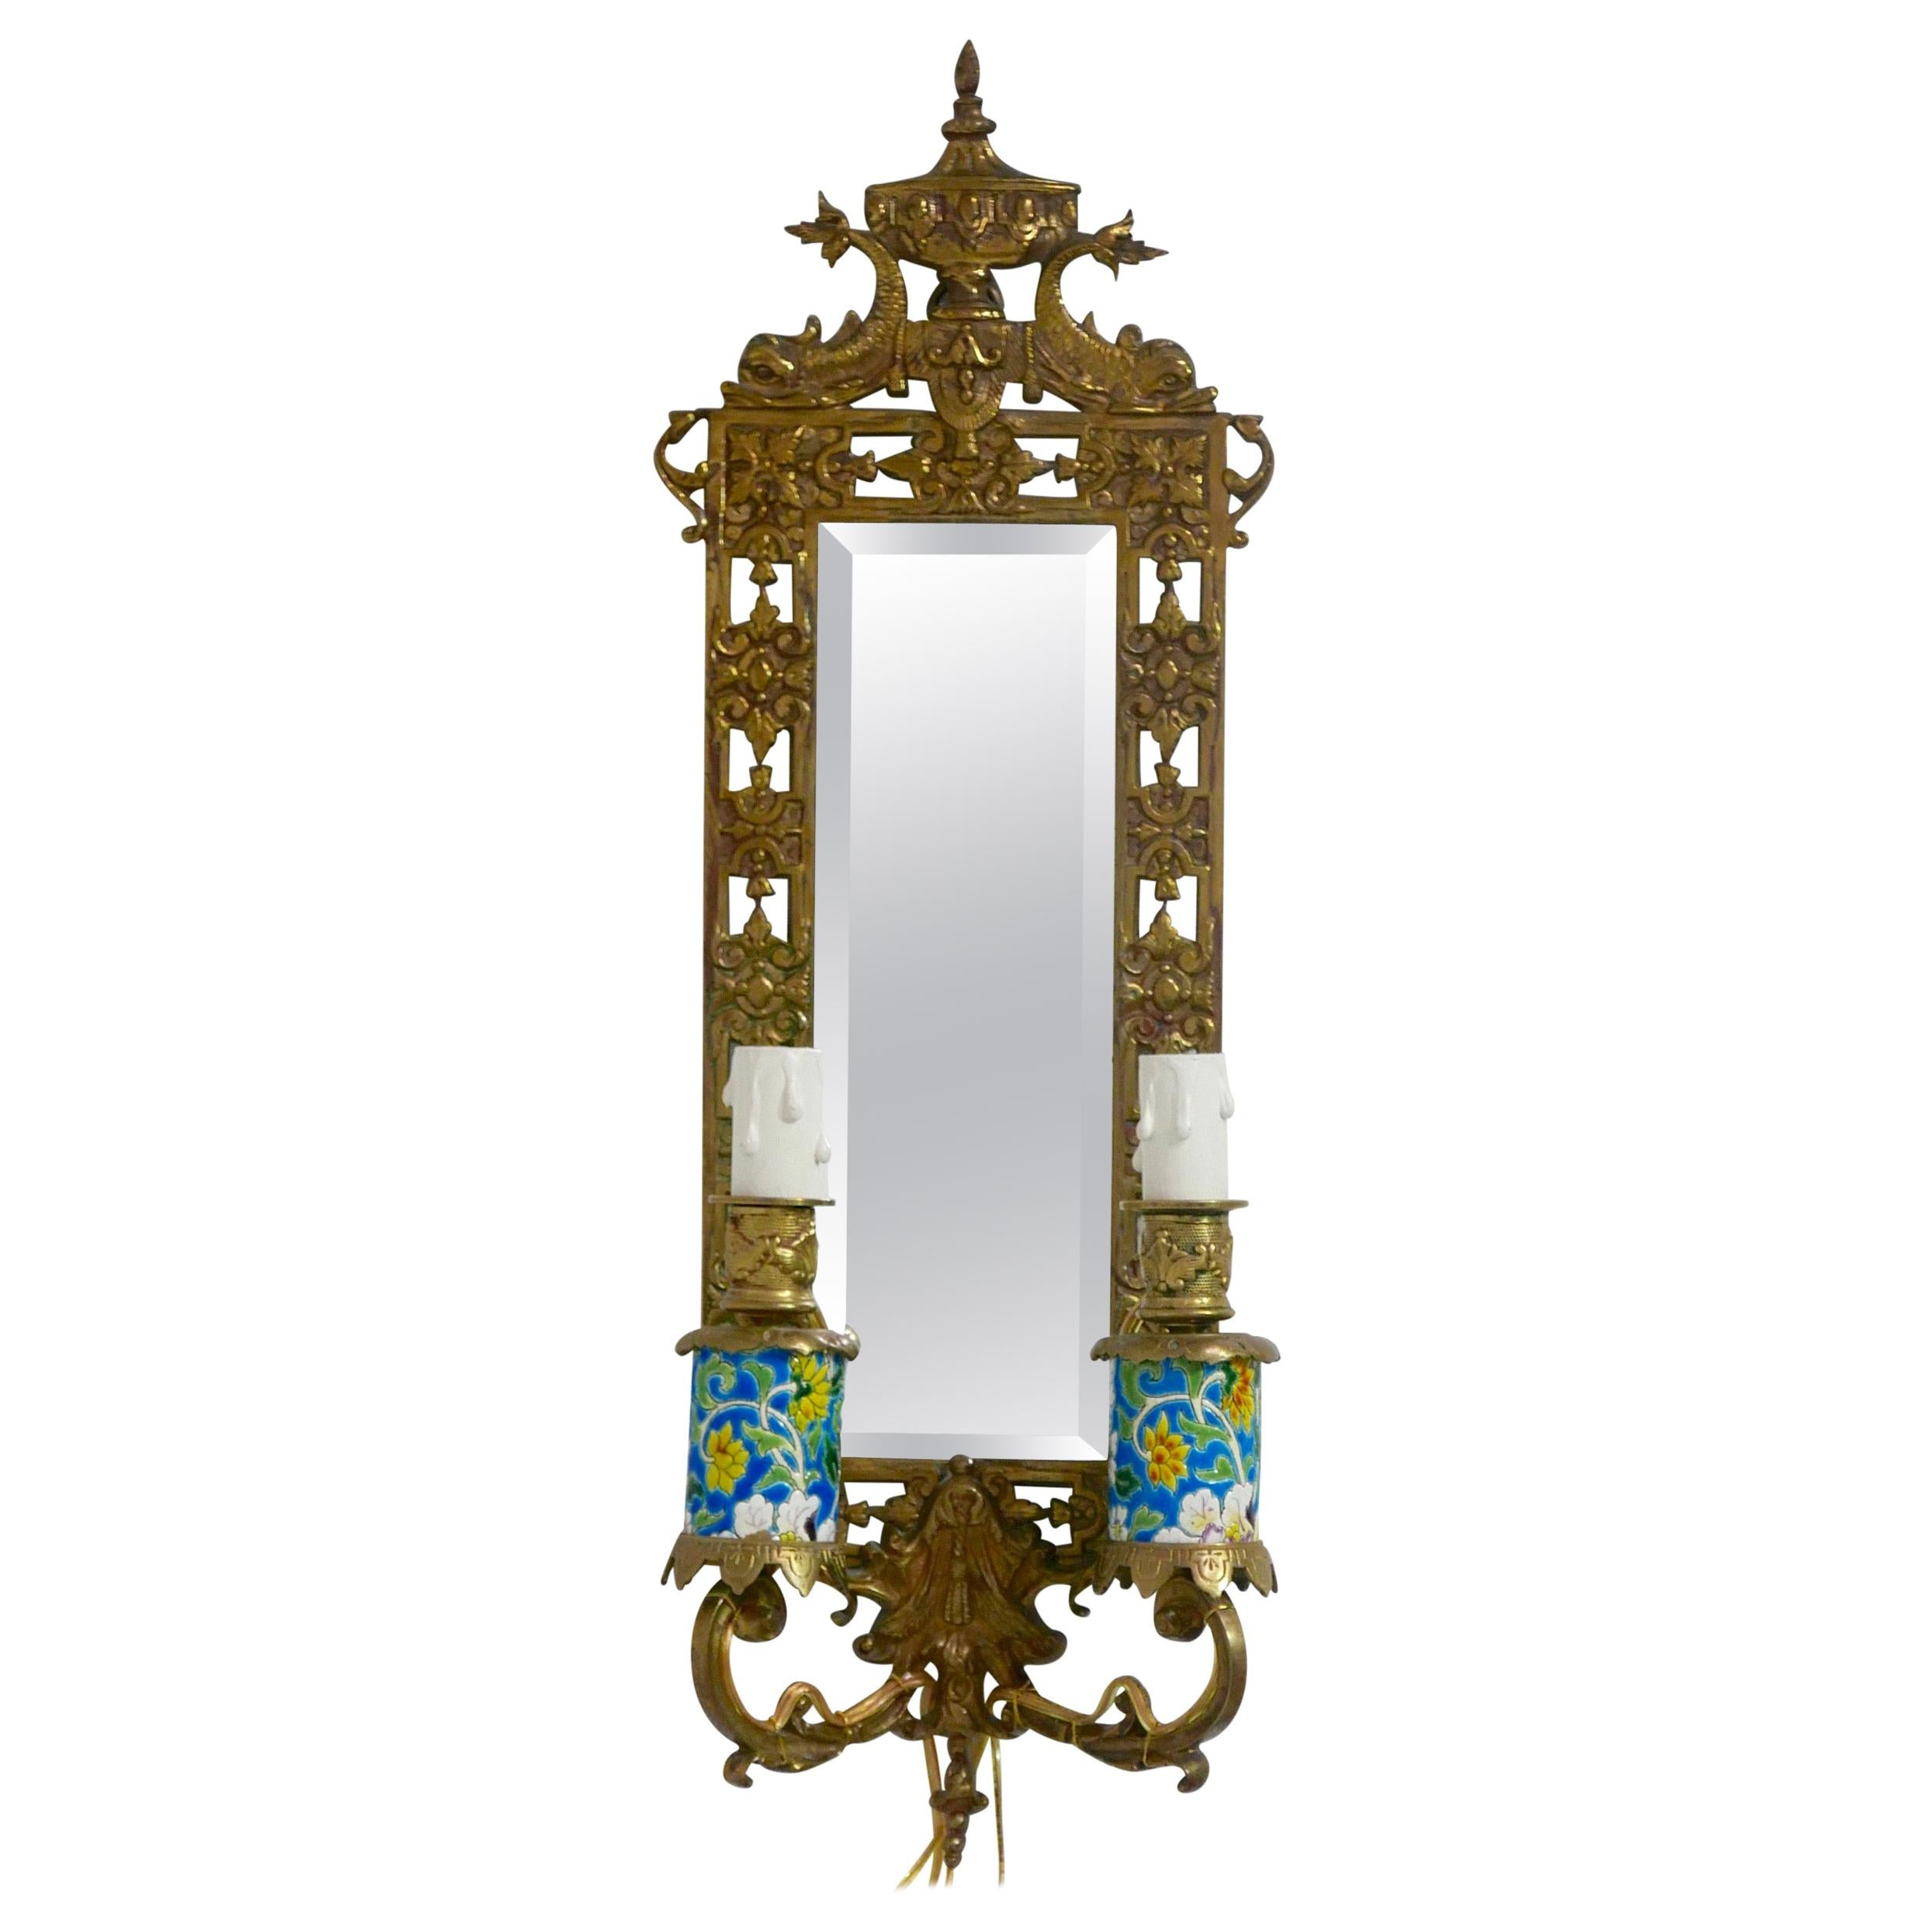 Renaissance Revival Bronze Sconce with Glazed Porcelain, French, 19th Century